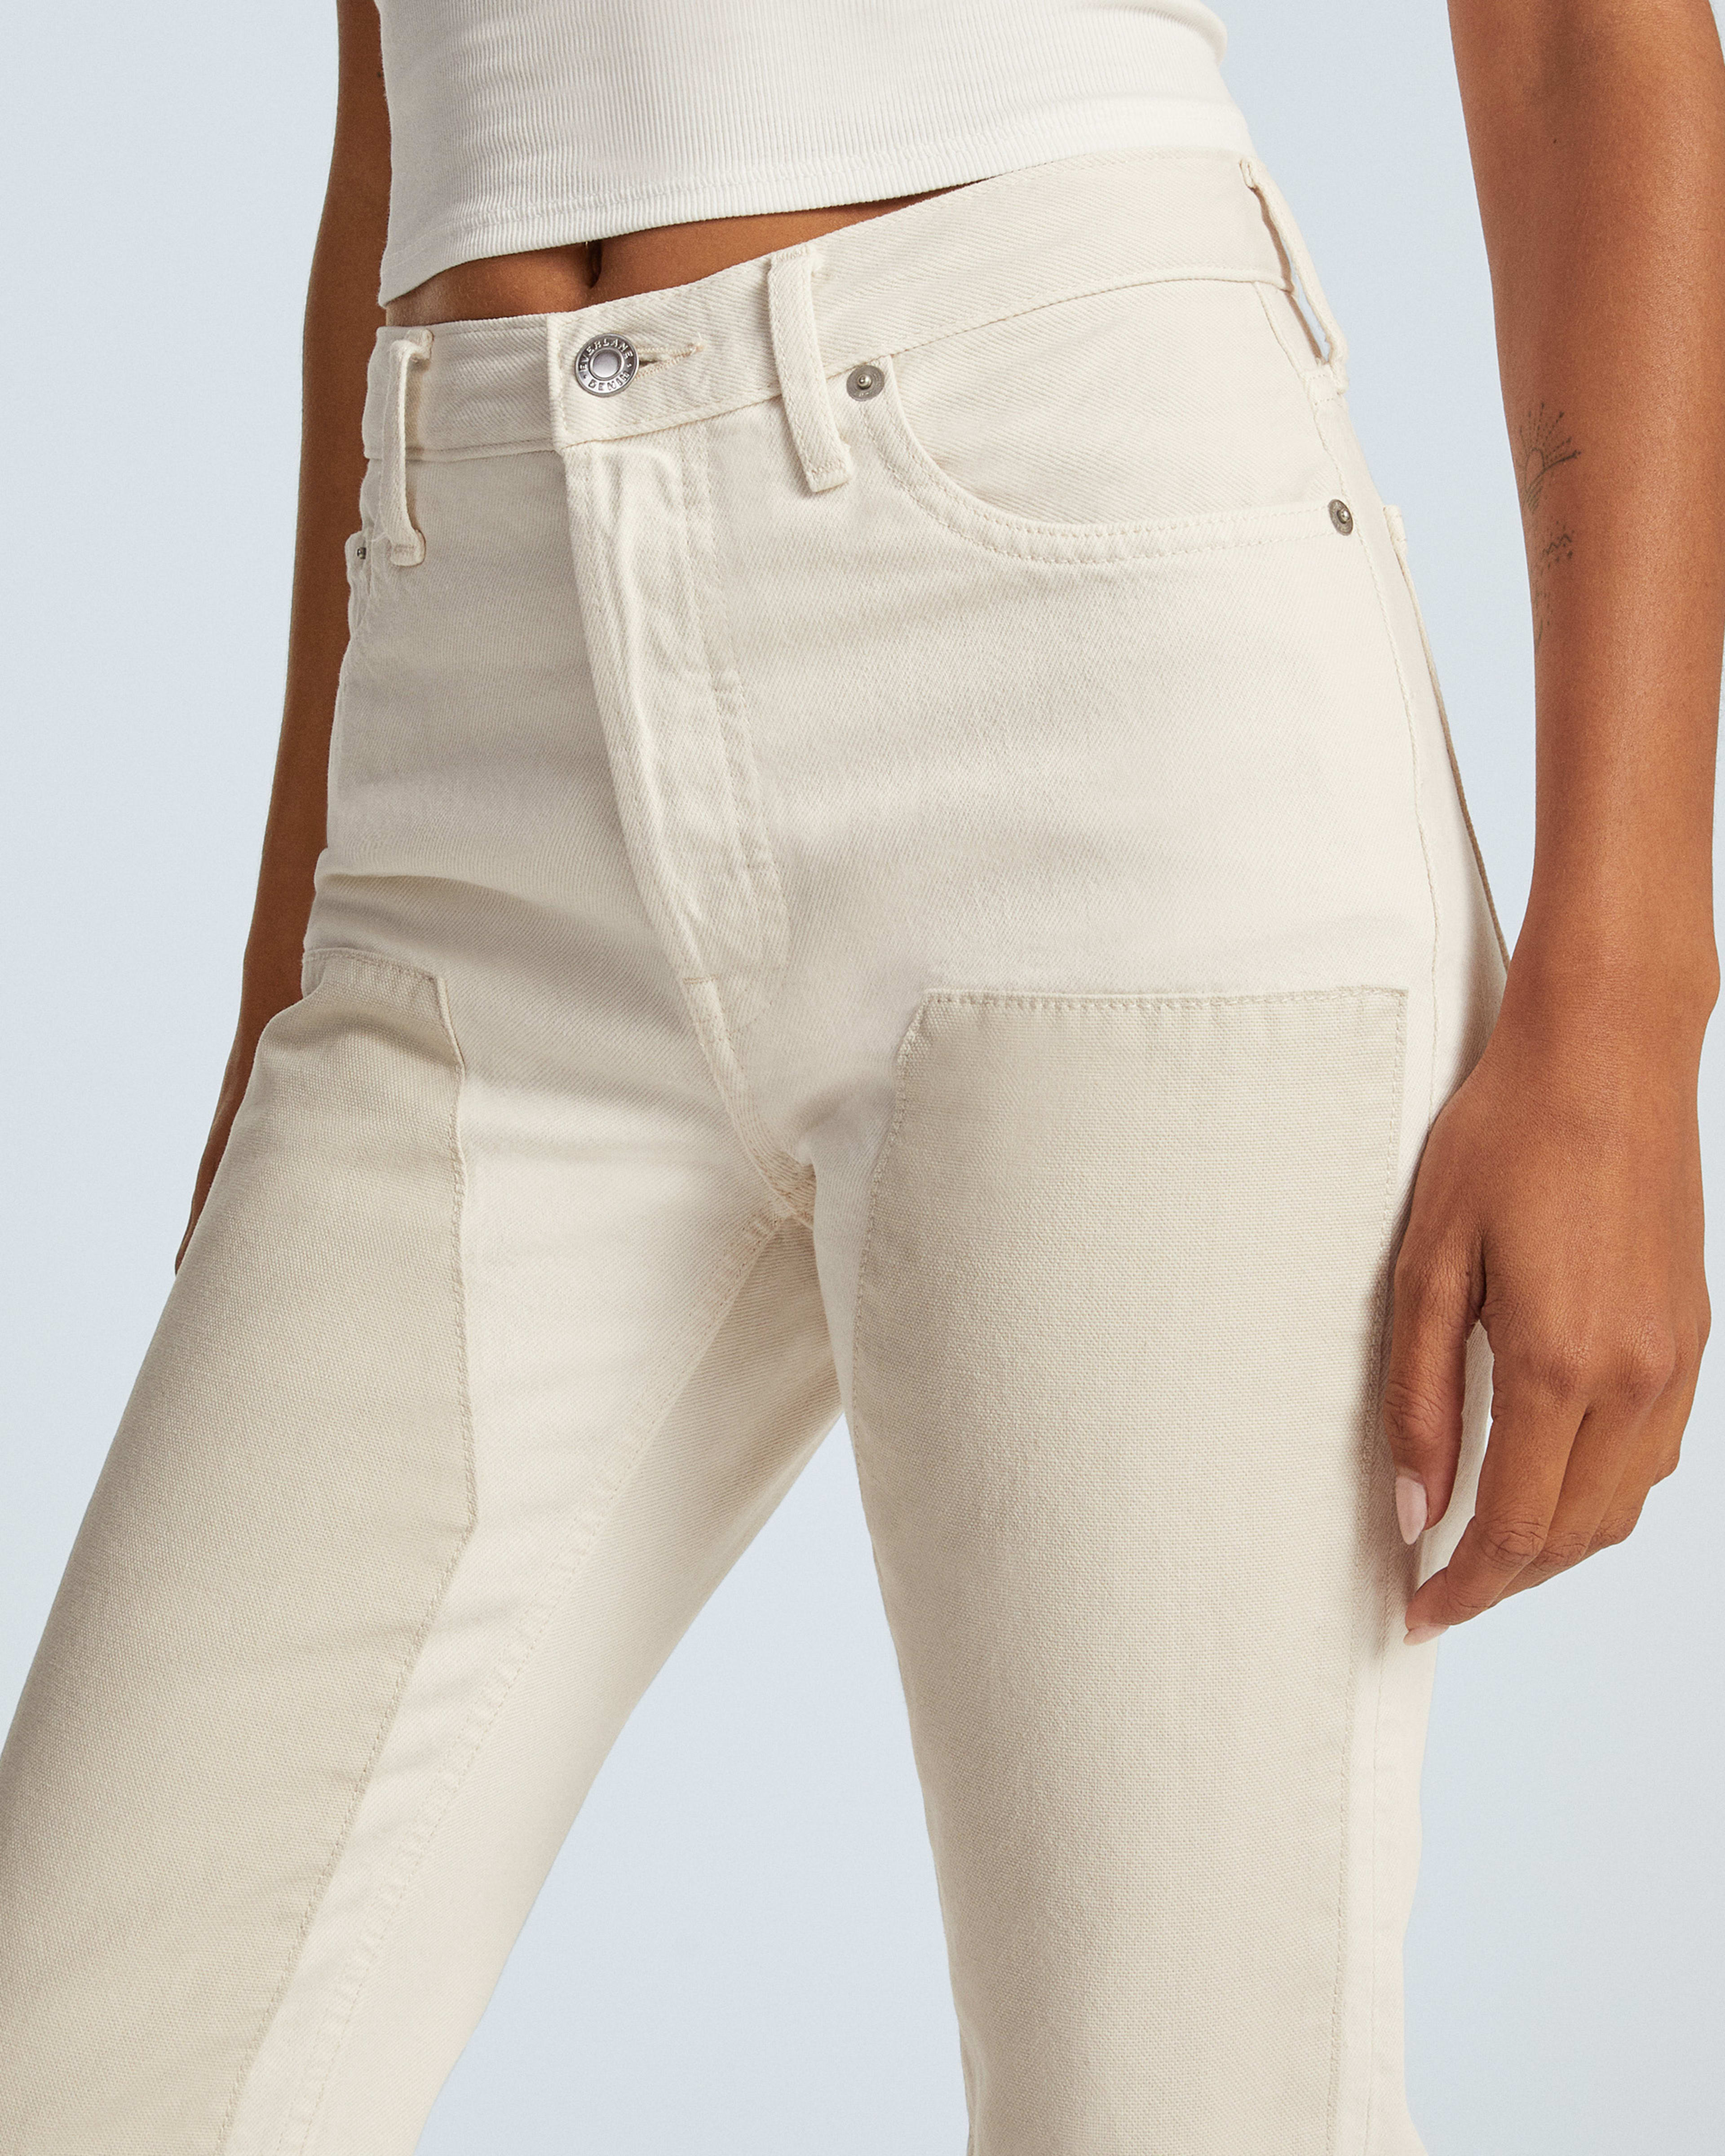 The ’90s Cheeky® Jean Pure Craft – Everlane